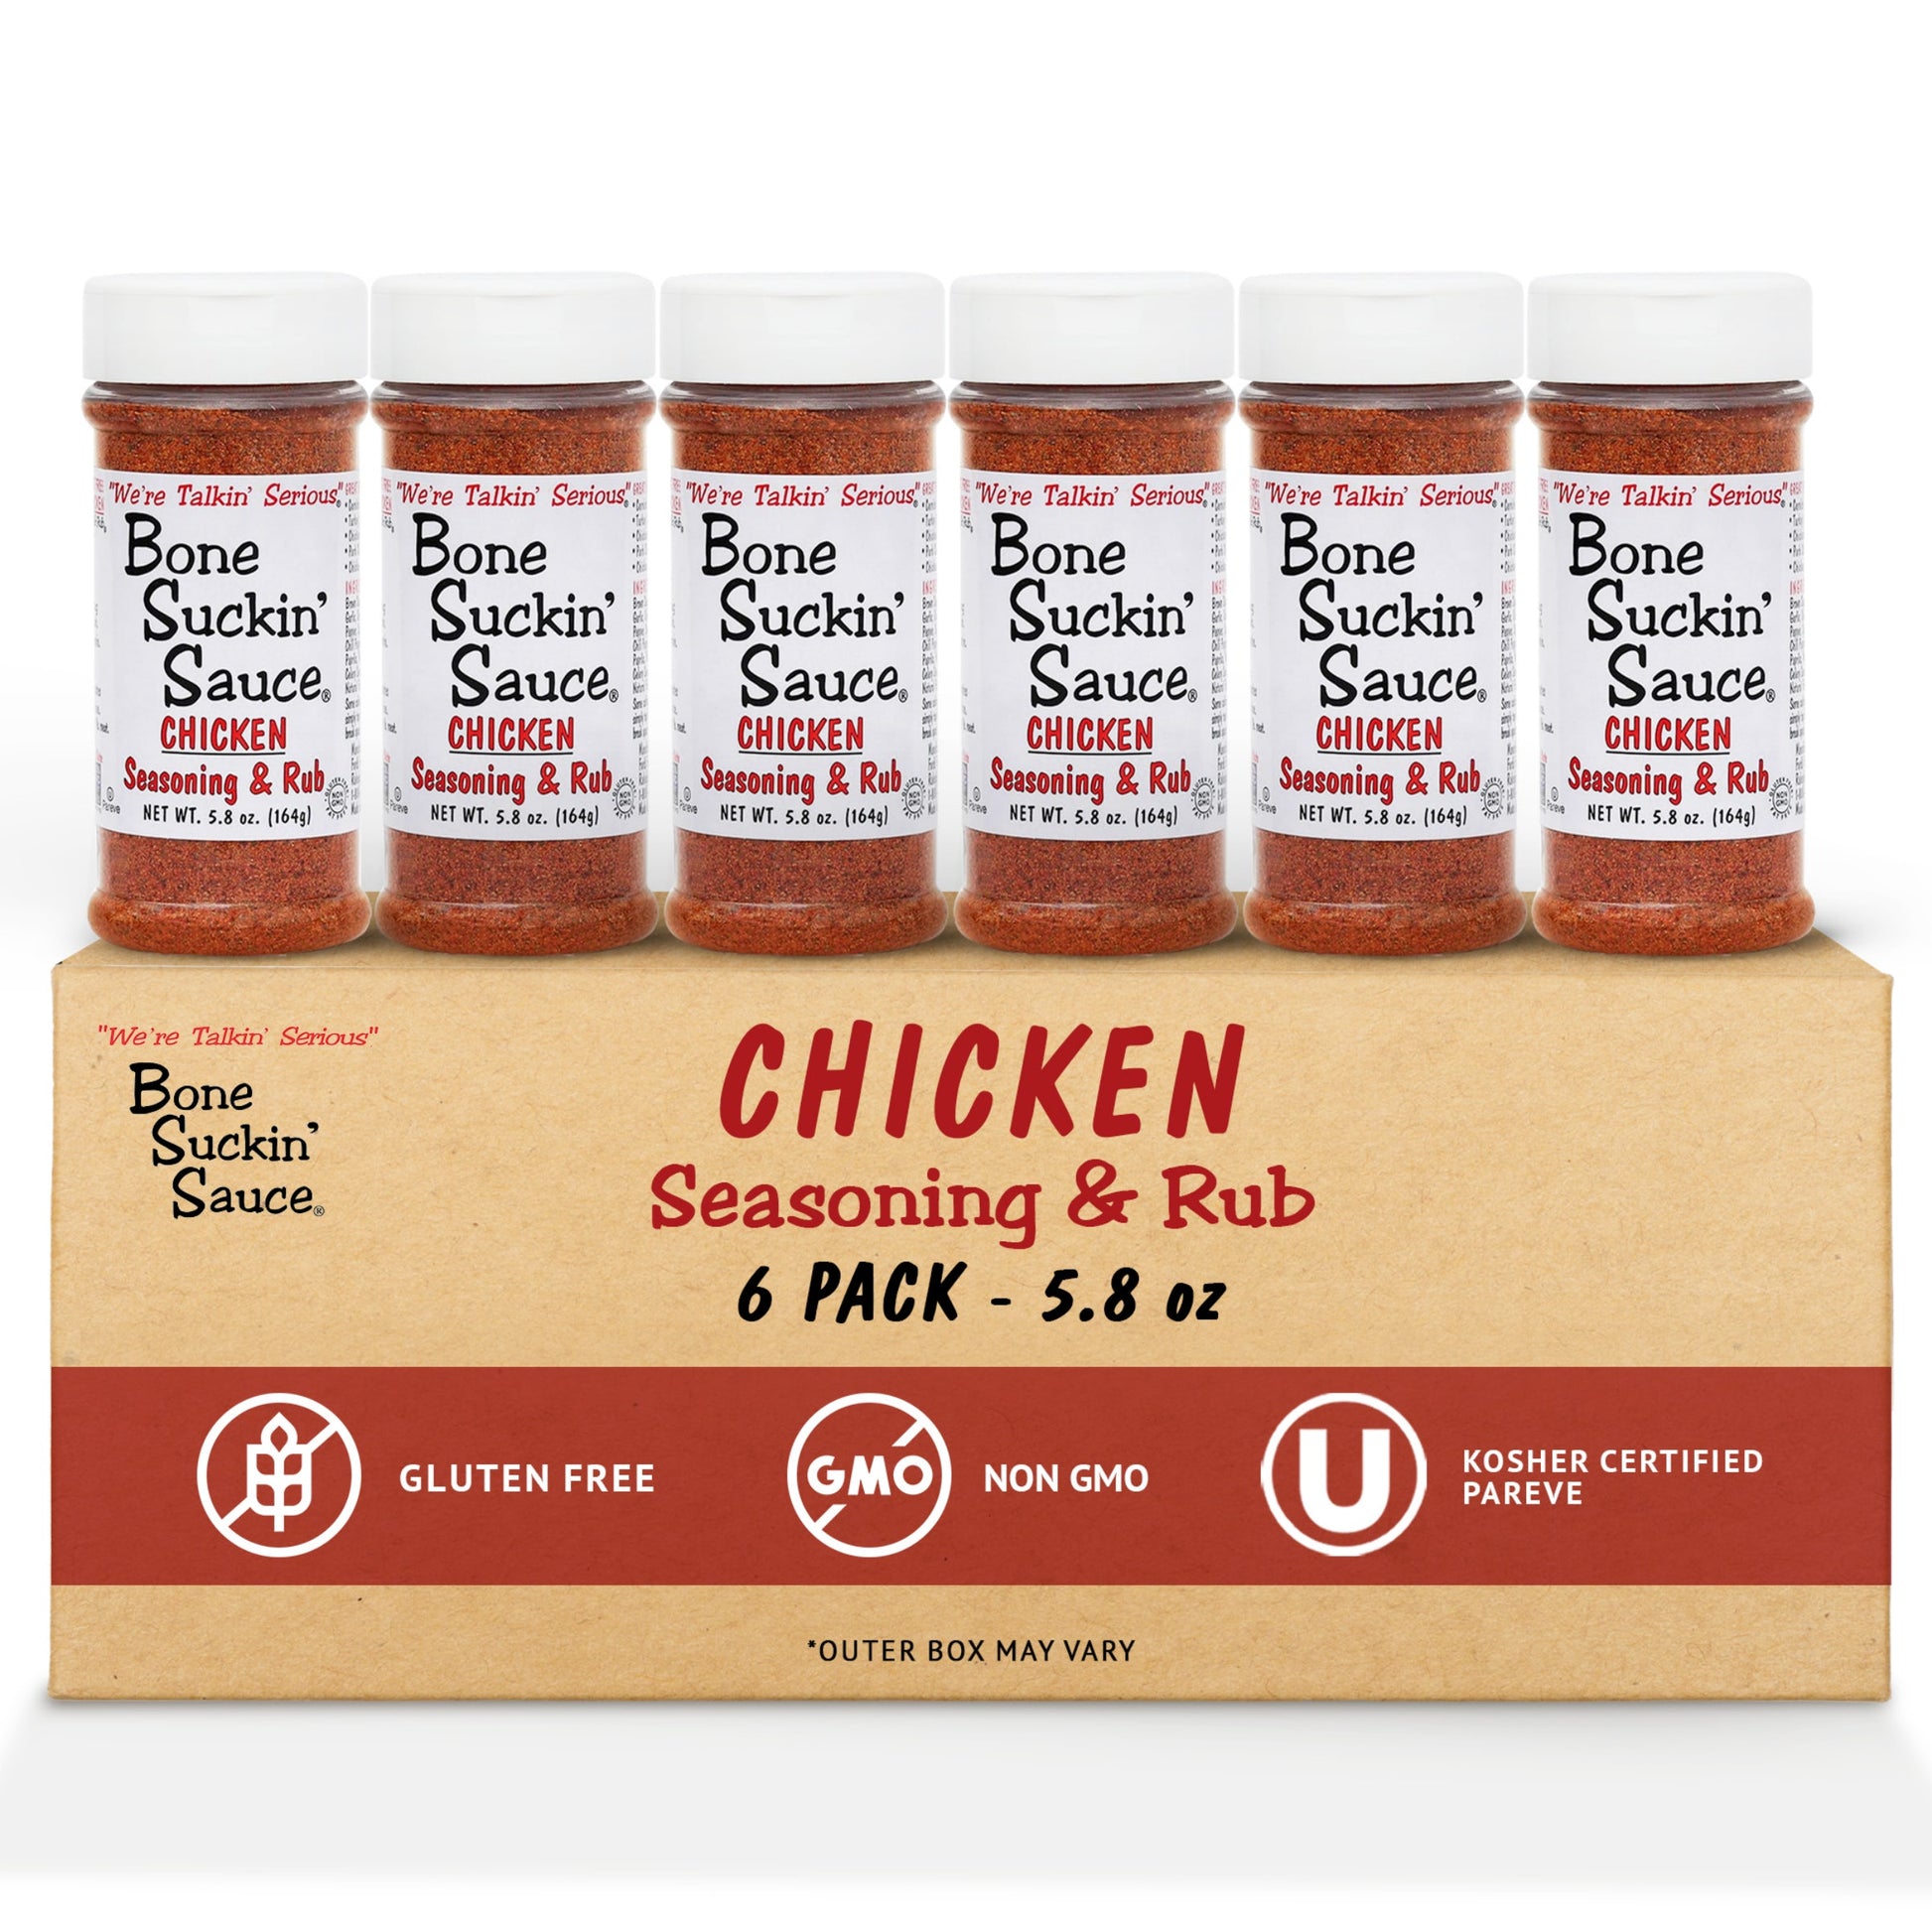 Bone Suckin'® Chicken Seasoning & Rub, 5.8 oz. A lighter blend of the brown sugar, paprika and spices found in the Original Seasoning & Rub, garlic and sage come to the forefront of our poultry blend. While it’s perfect on chicken, turkey, and fish, like our other seasoning & rub products, it’s versatile enough to be used on just about anything. 6 pack